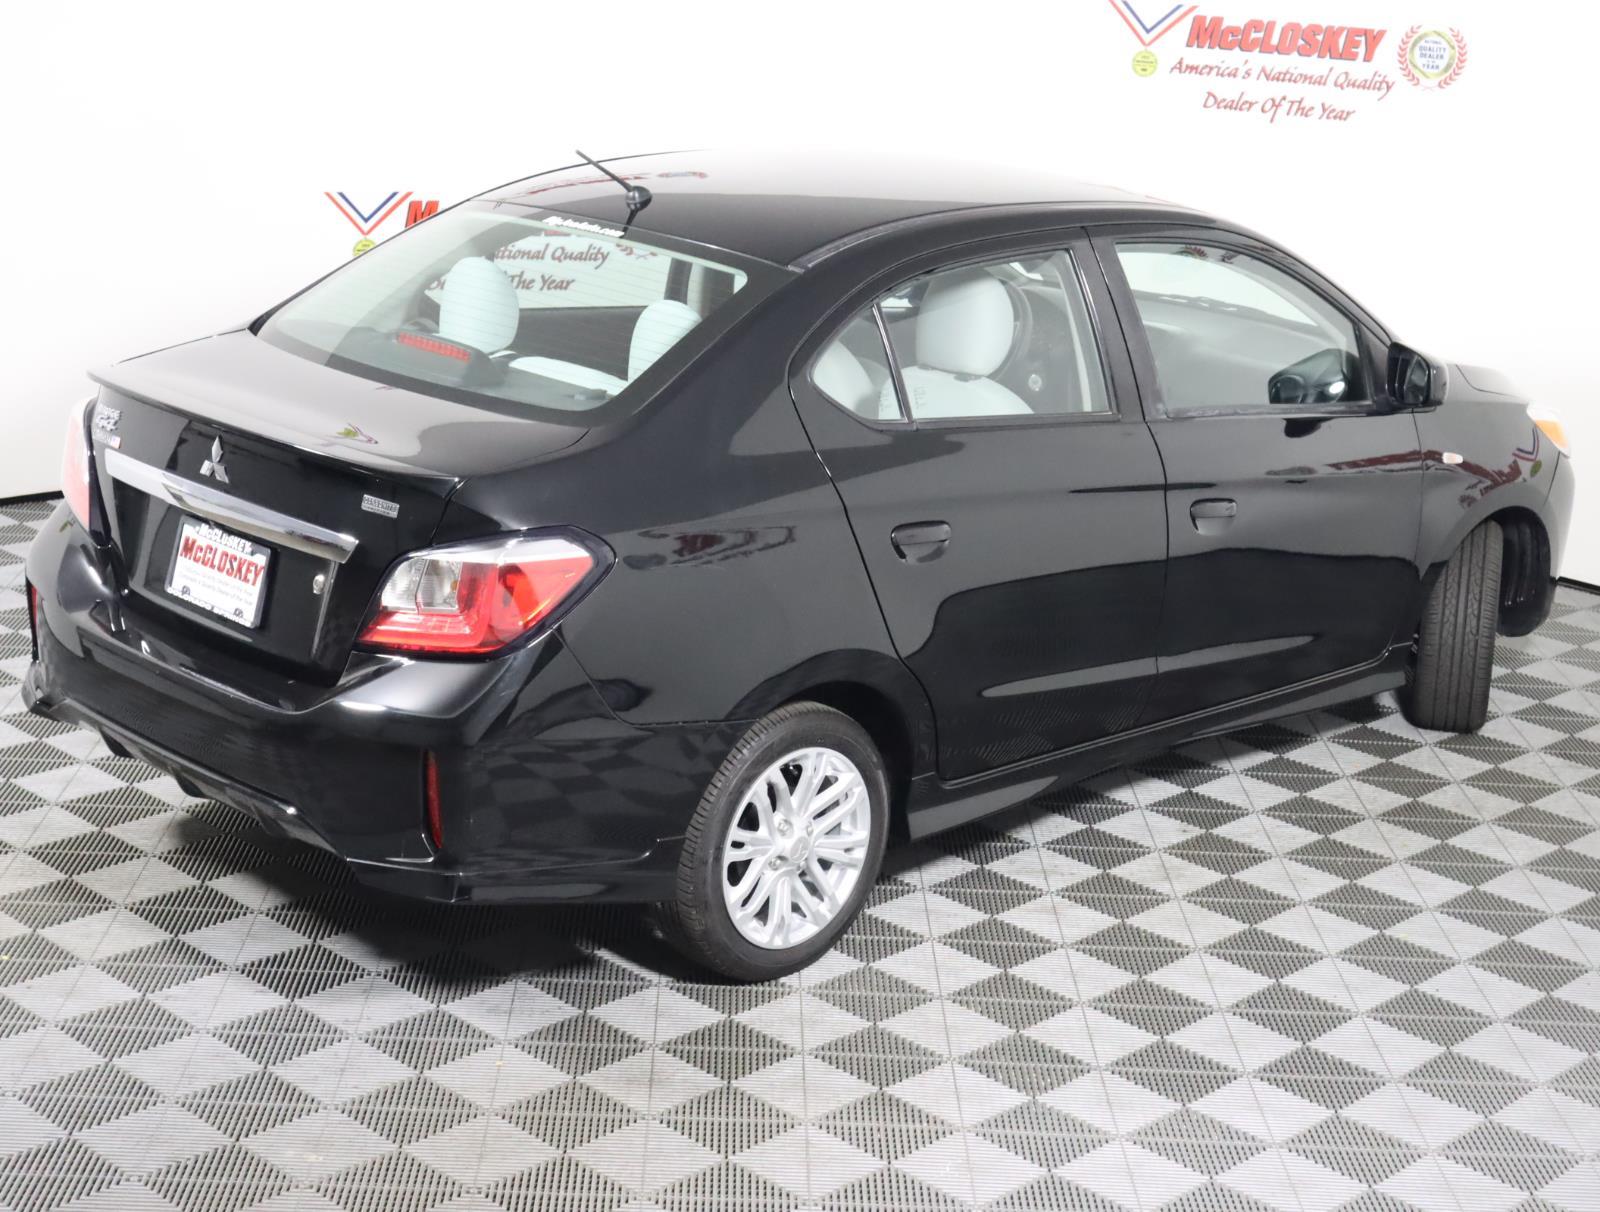 Preowned 2021 Mitsubishi Mirage G4 ES LOW MILES! EZ FINANCING! 41 MPG! for sale by McCloskey Imports & 4X4's in Colorado Springs, CO